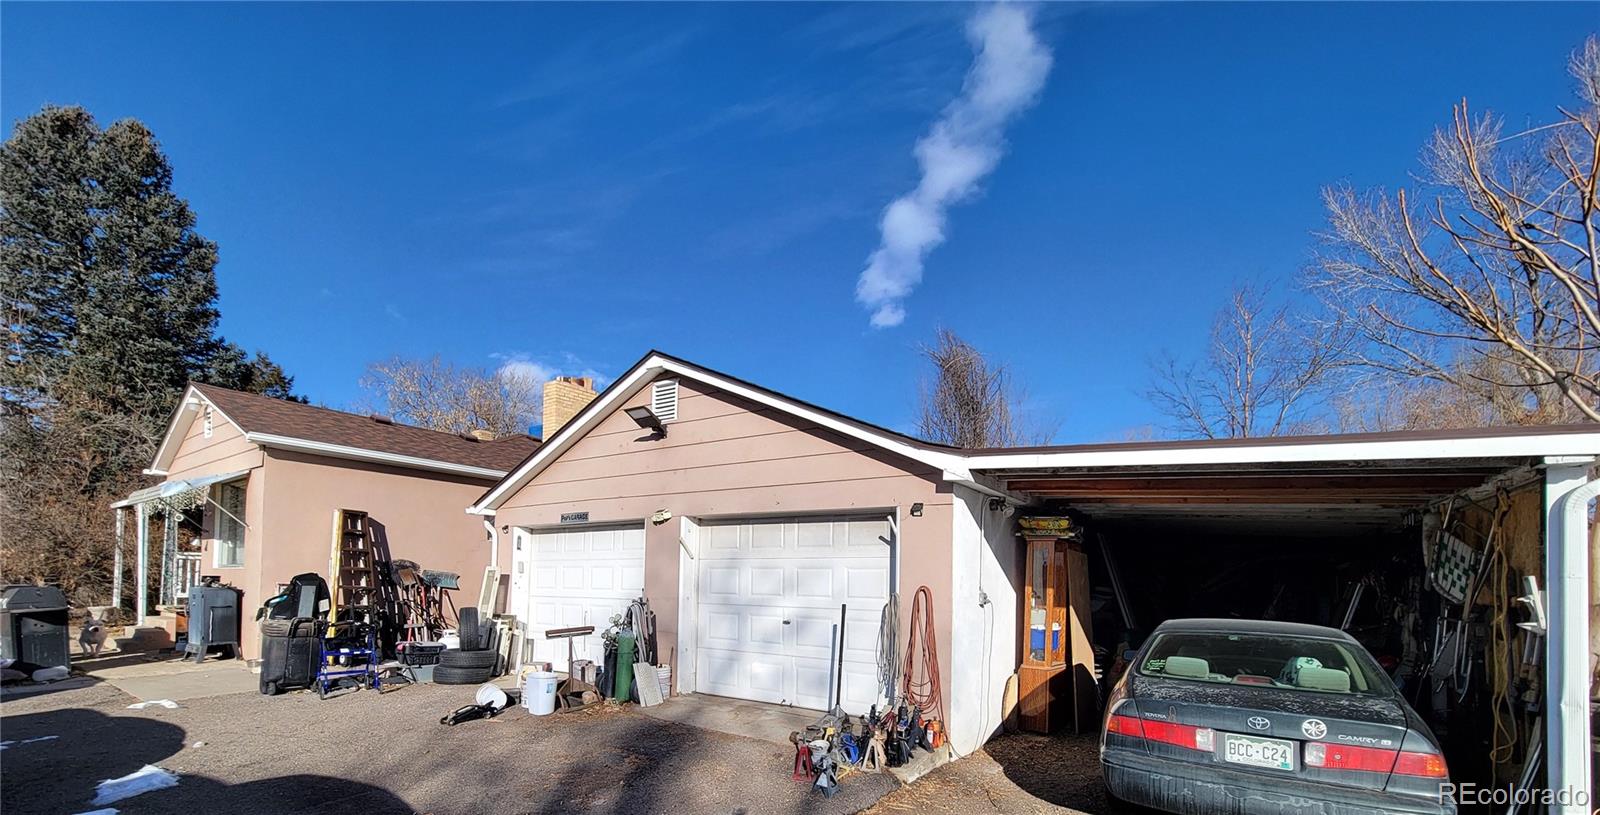 Report Image for 9895 W 20th Avenue,Lakewood, Colorado